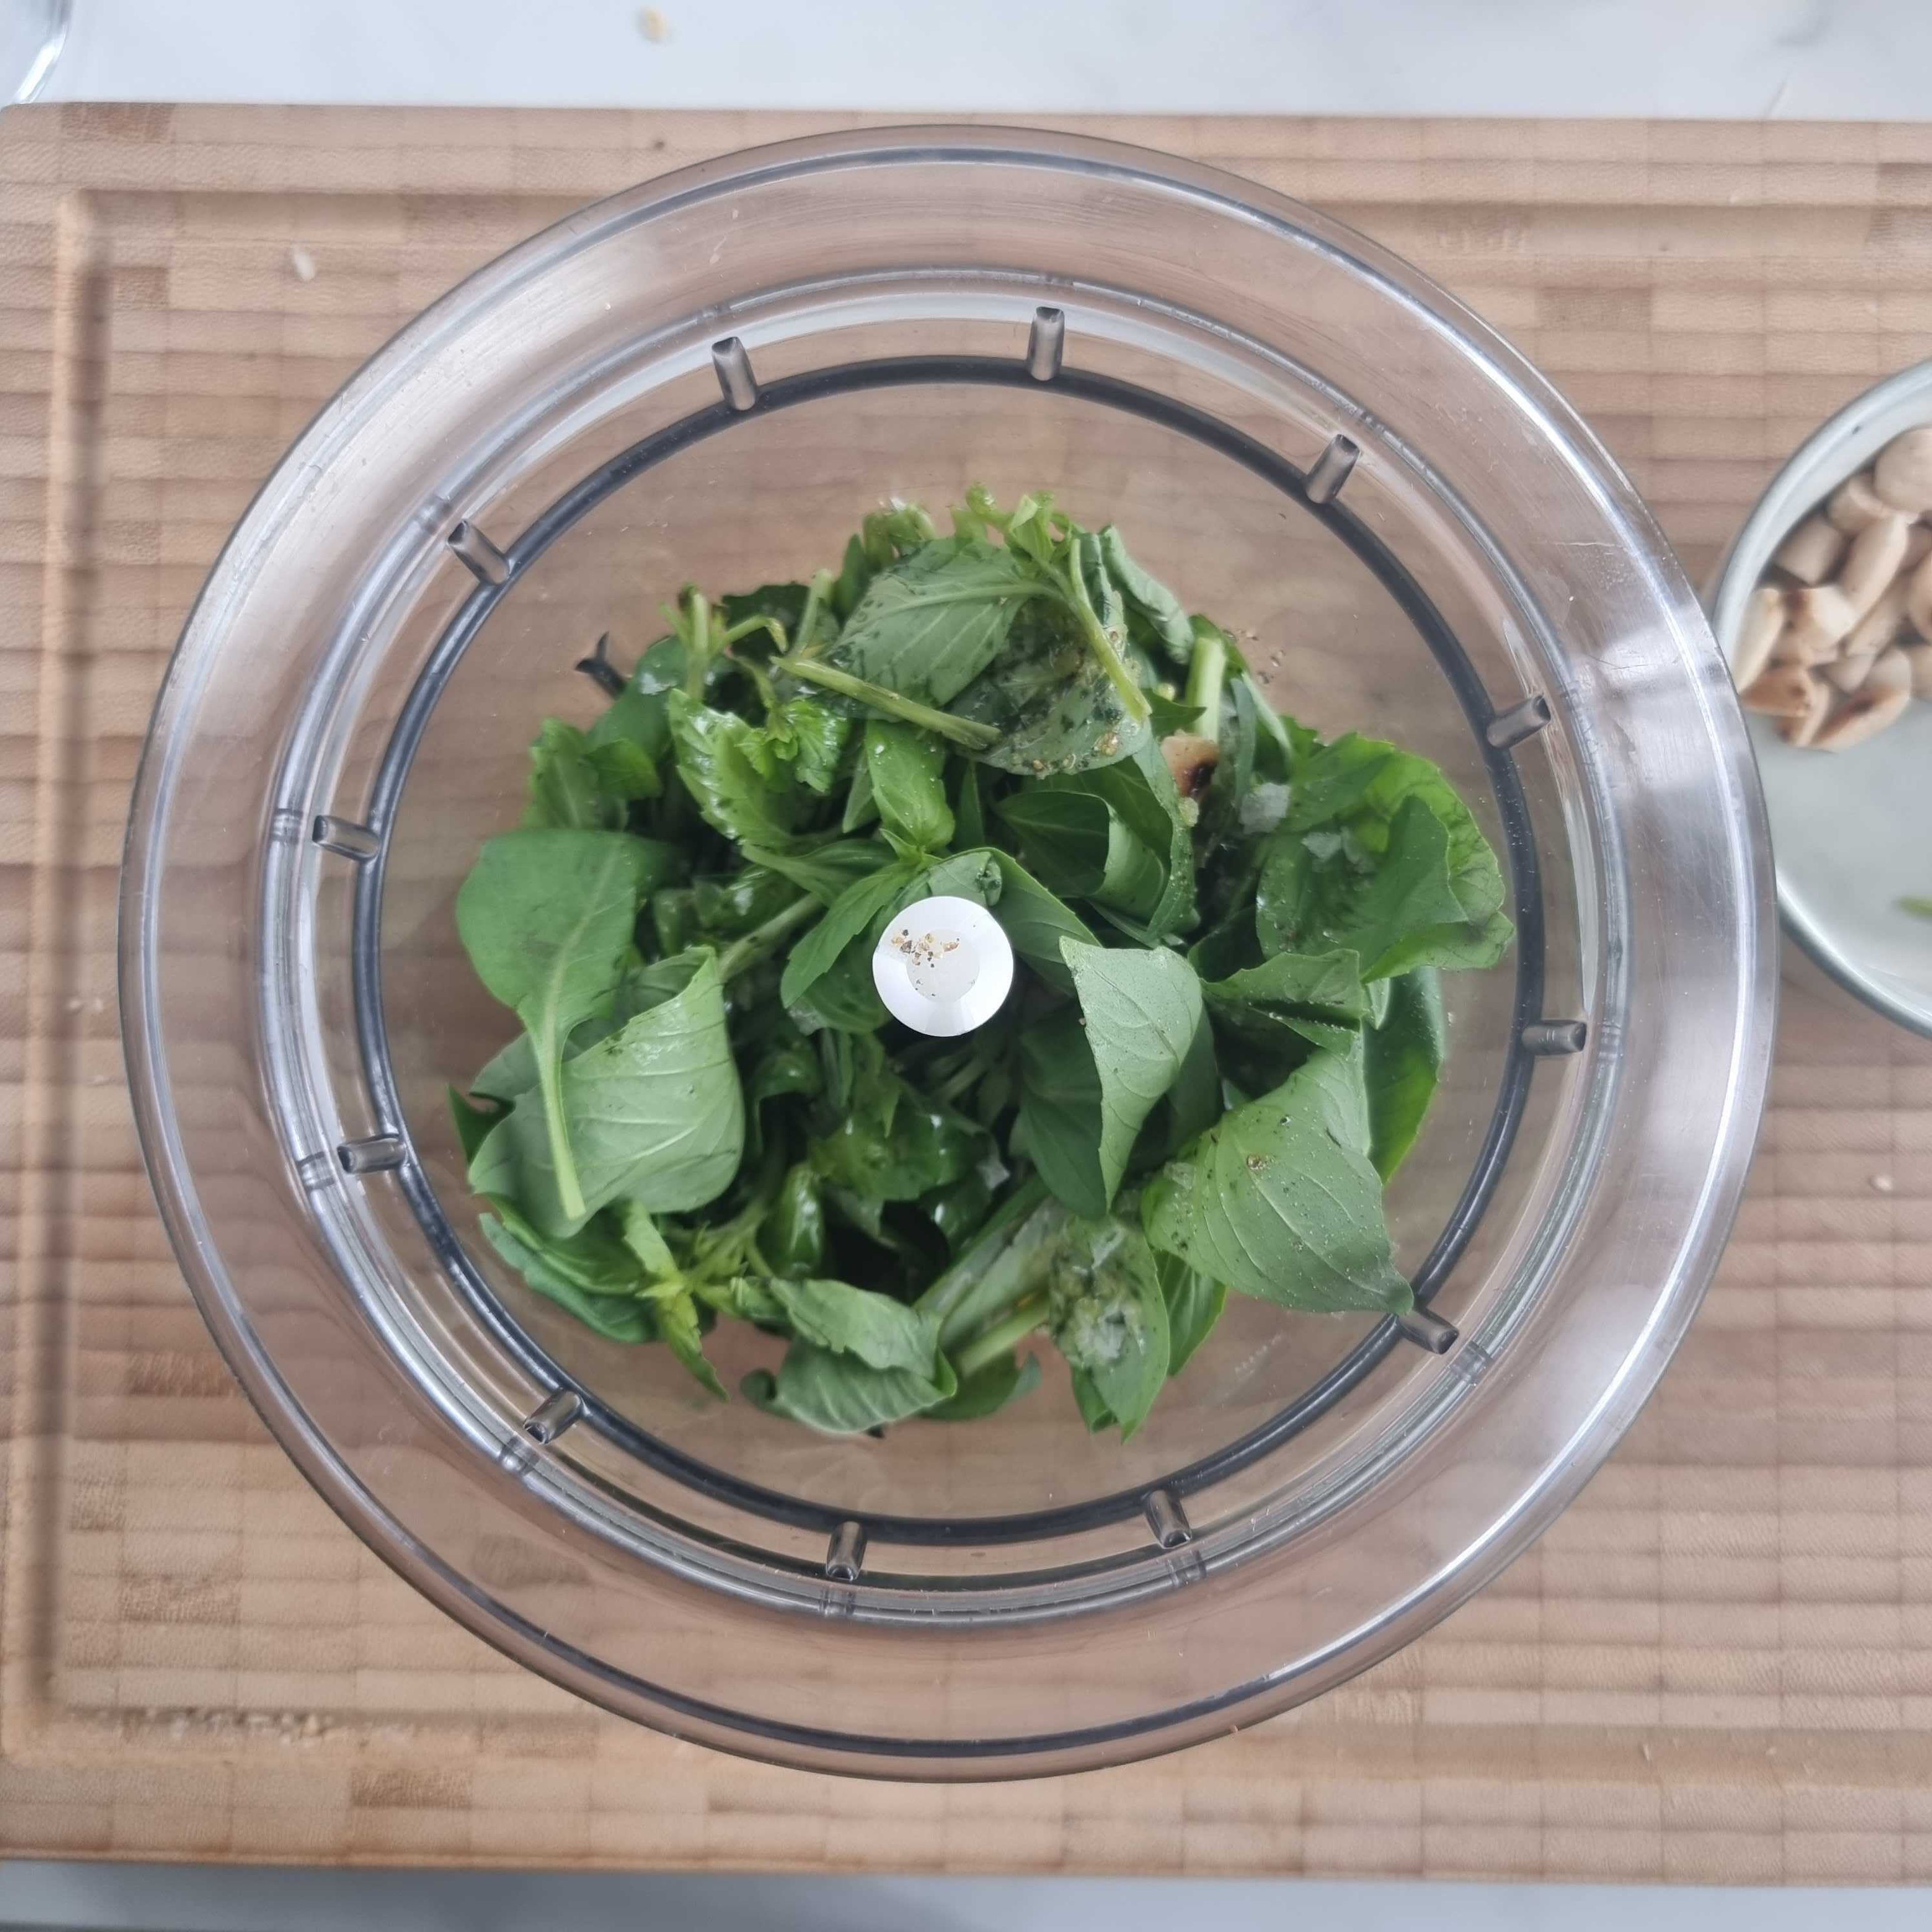 Add half of the almonds, basil, salt, pepper, lemon zest and the remaining olive oil to a food processor and process until smooth. Transfer the pesto to a large bowl.